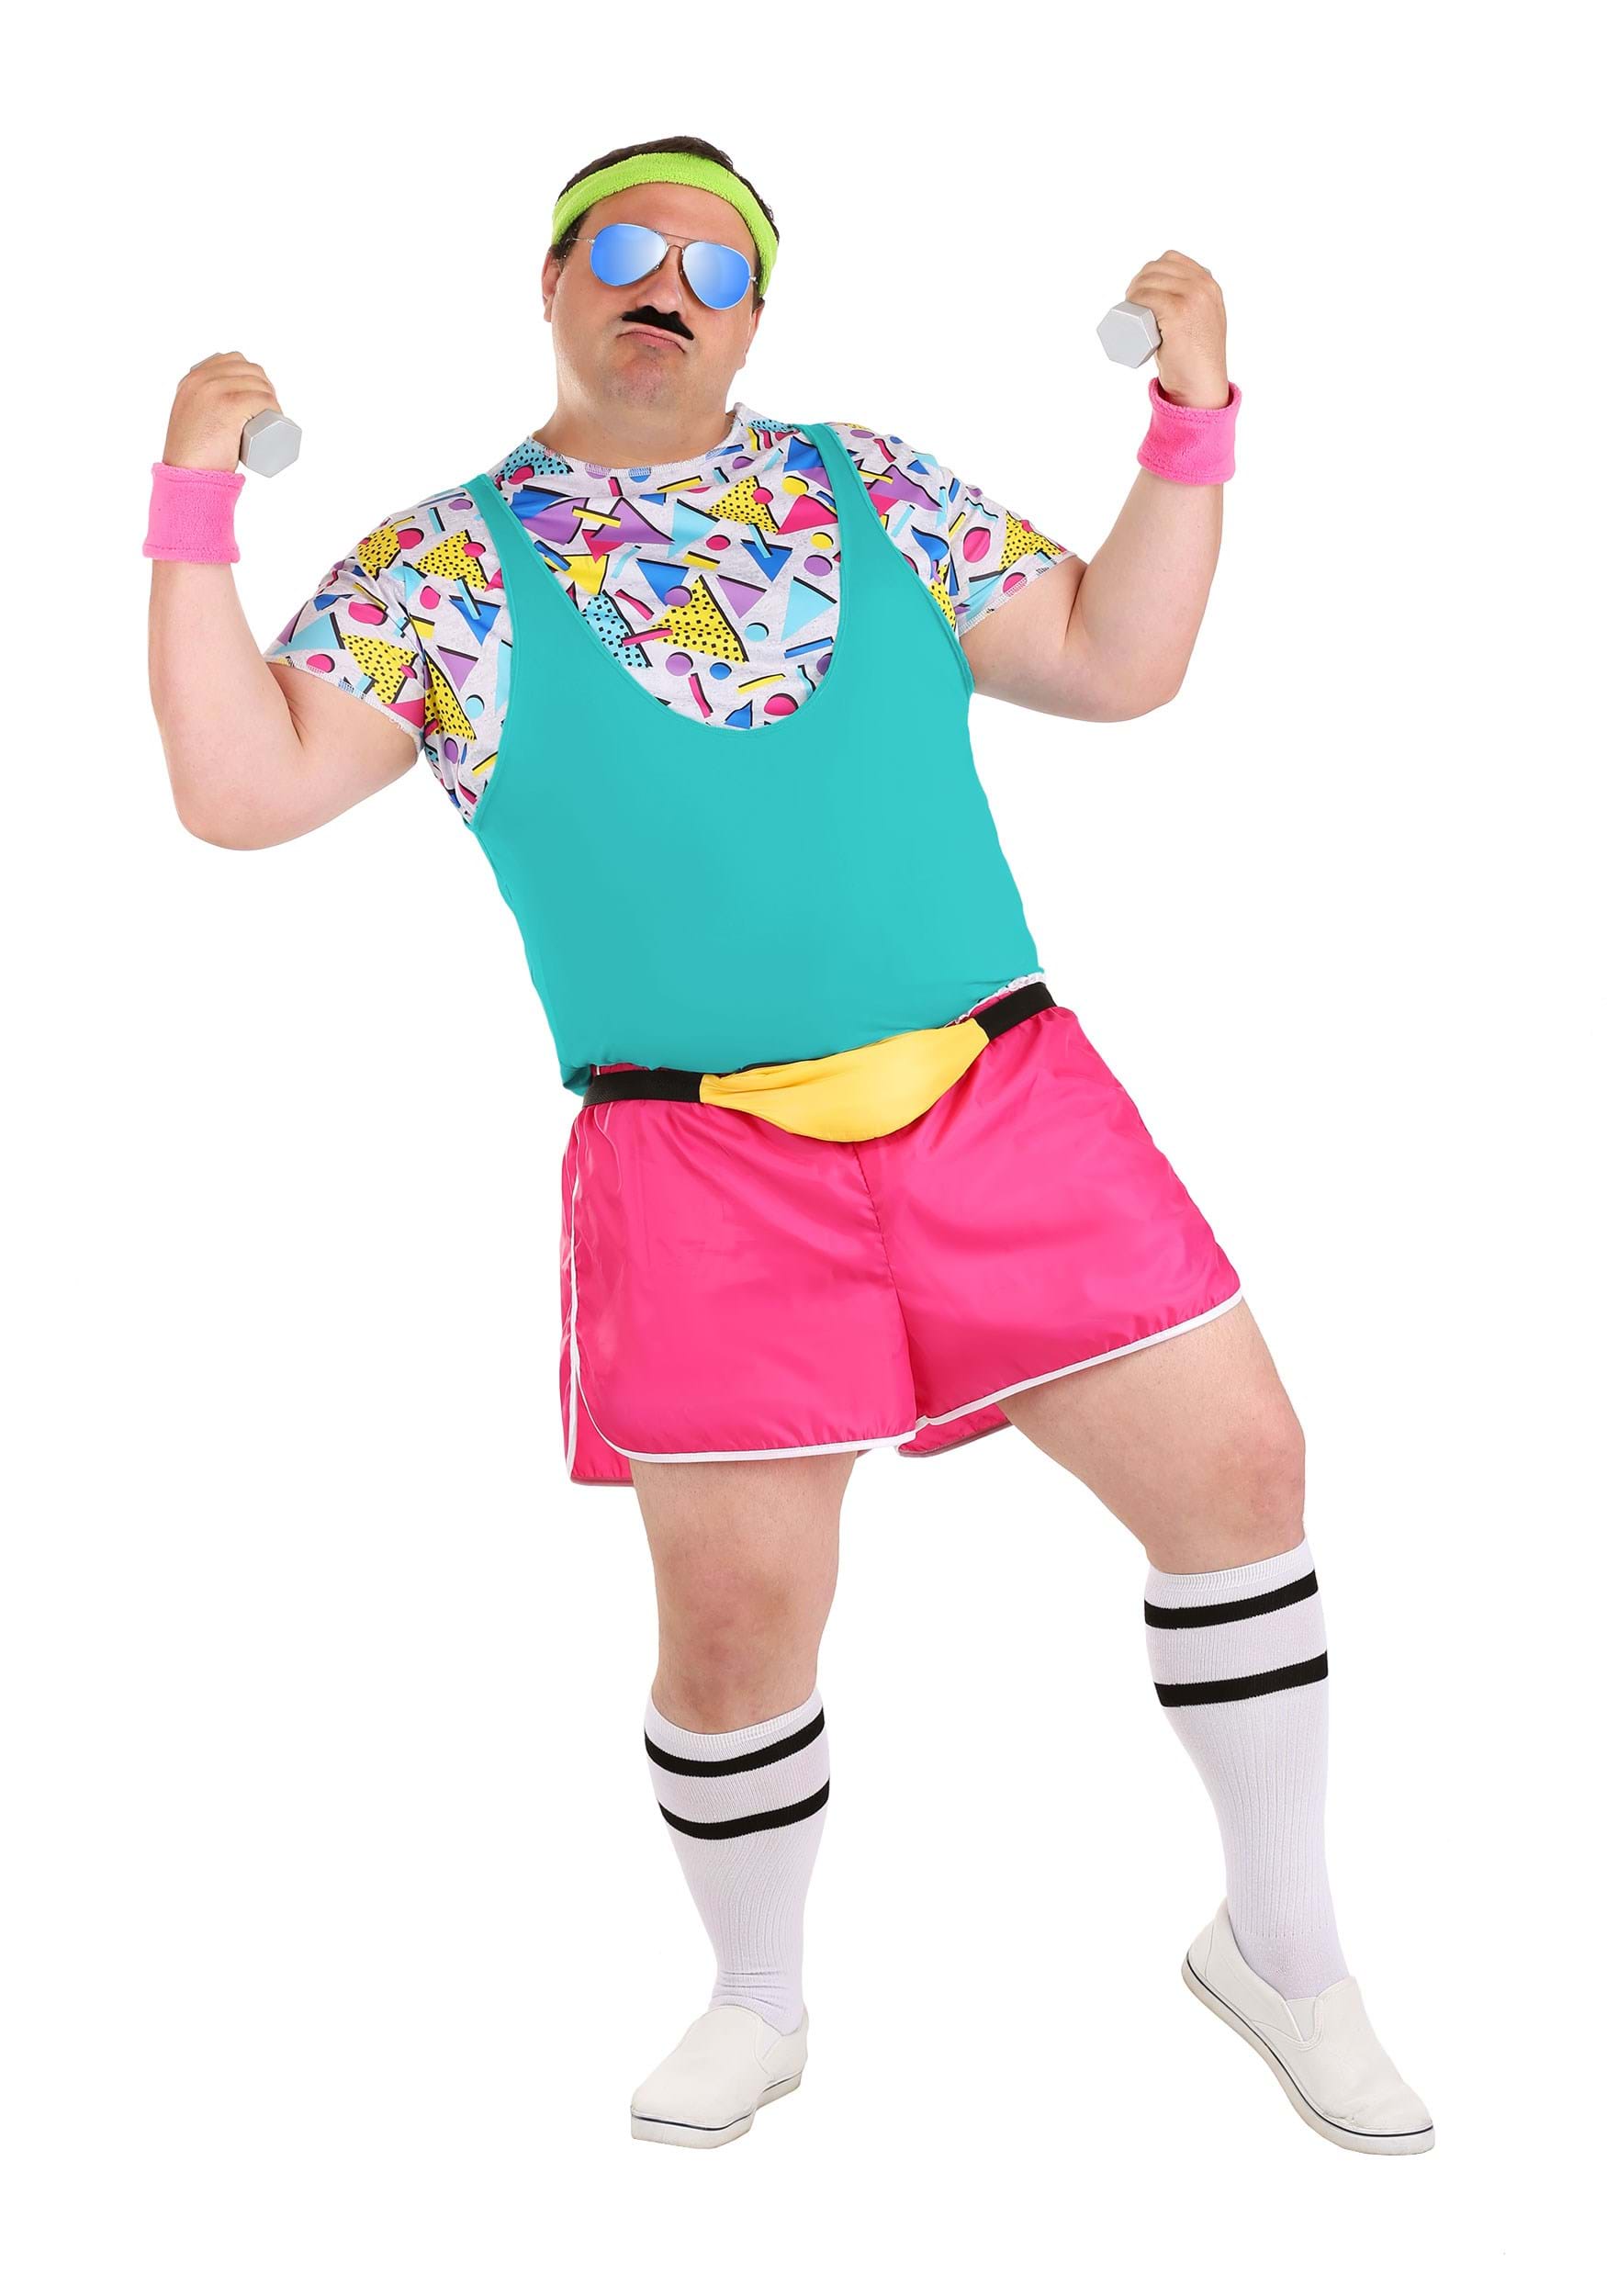 https://images.halloweencostumes.ca/products/64380/1-1/mens-plus-size-work-it-out-80s-costume-main.jpg